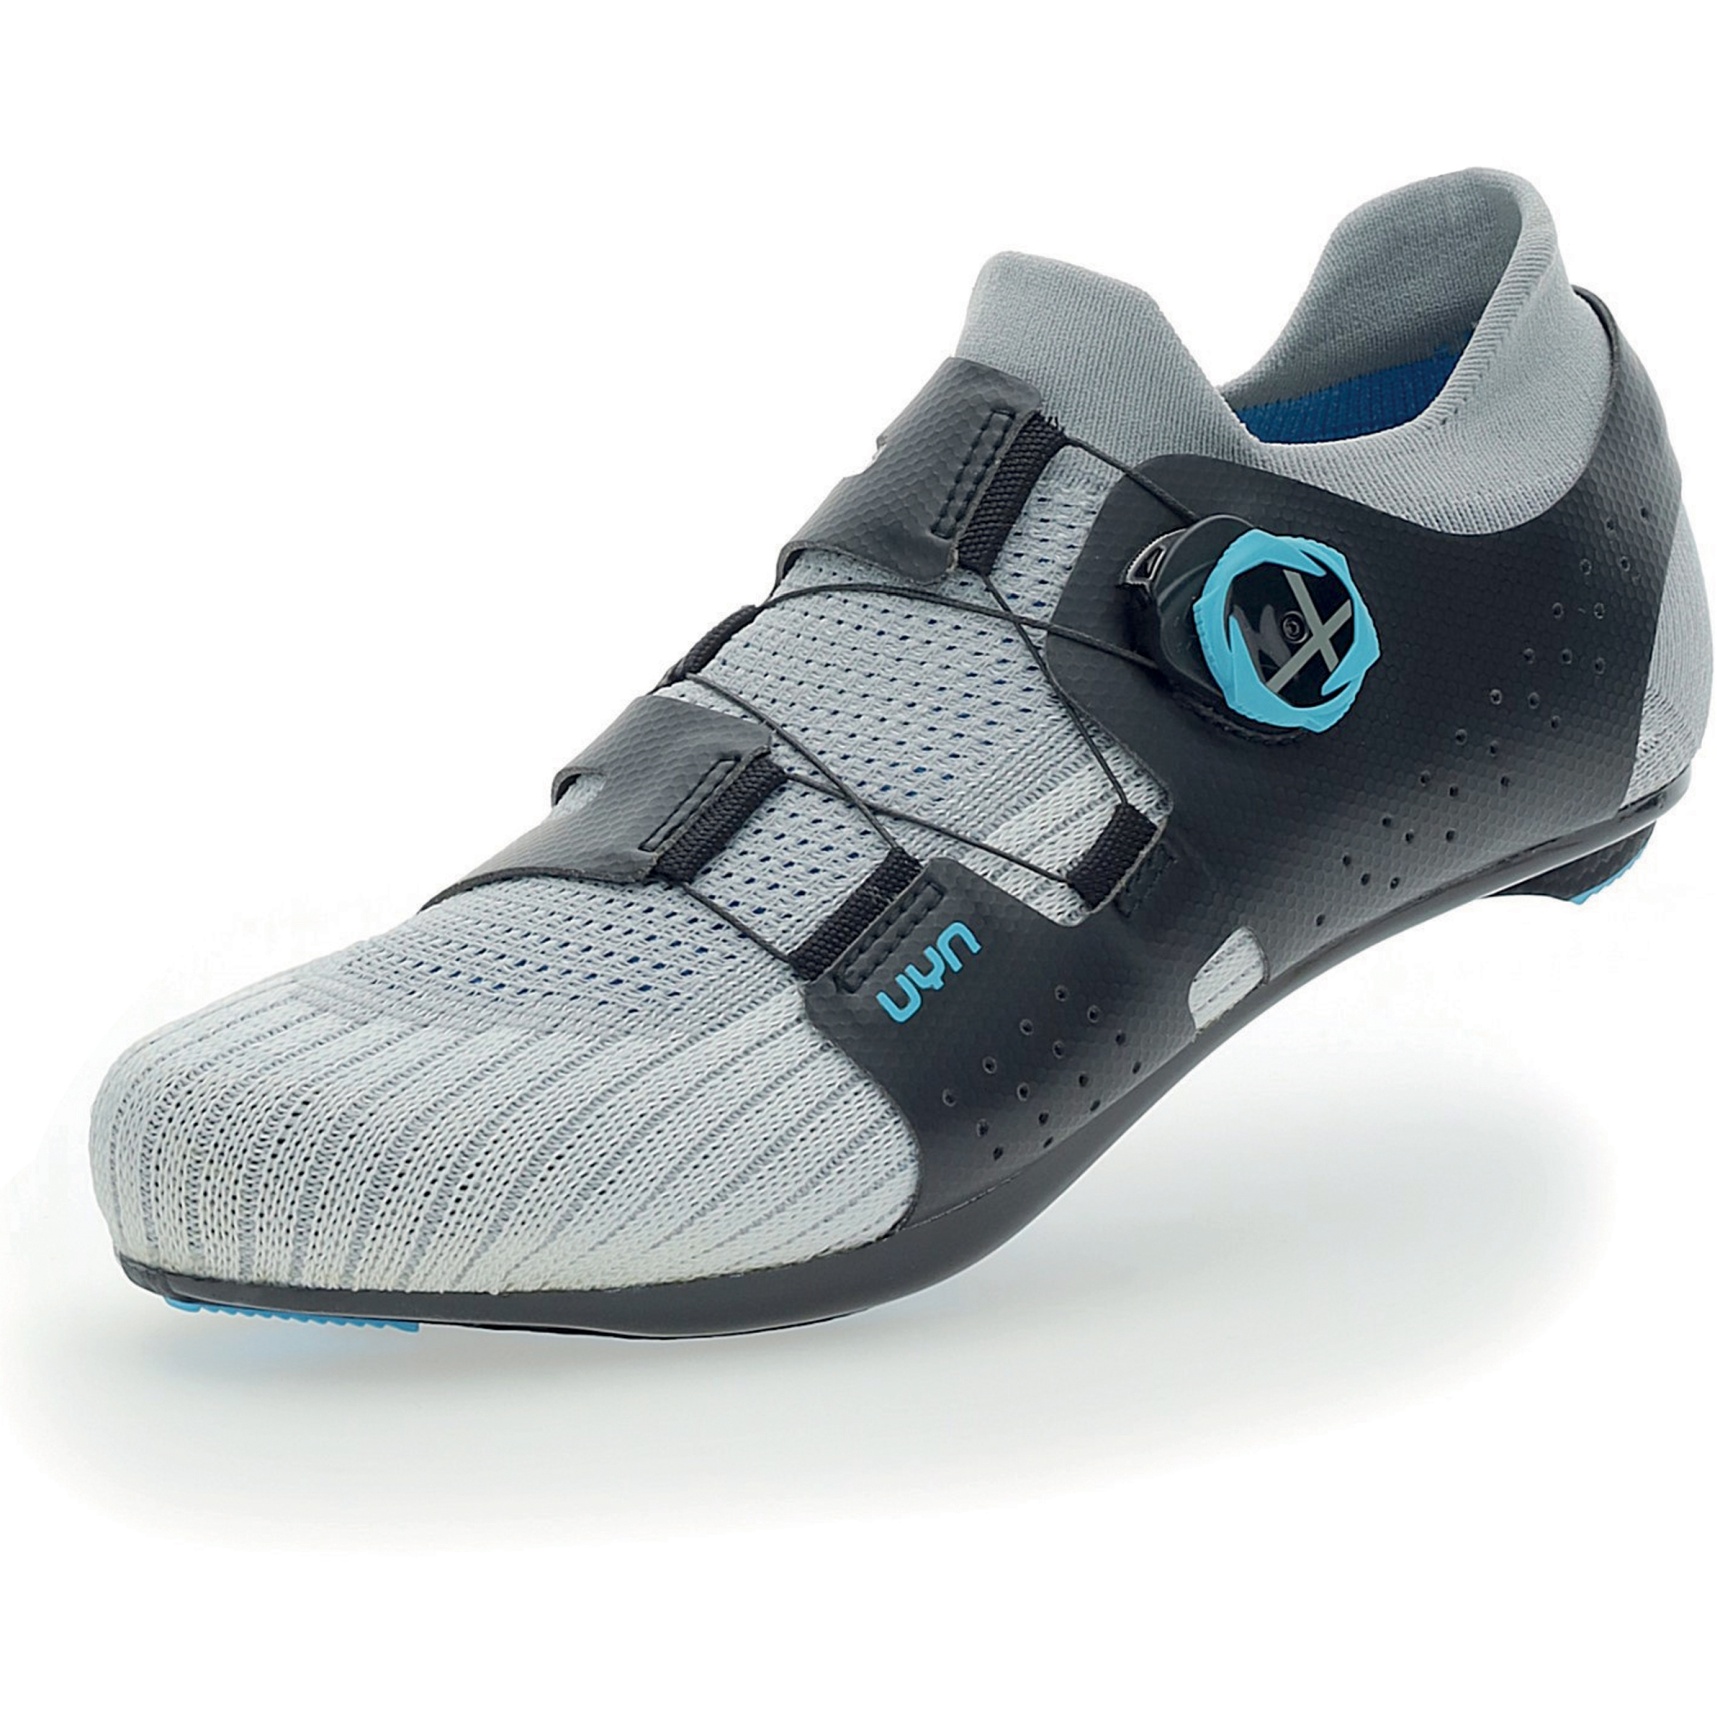 Picture of UYN Naked Carbon Road Bike Shoes - Silver/Blue